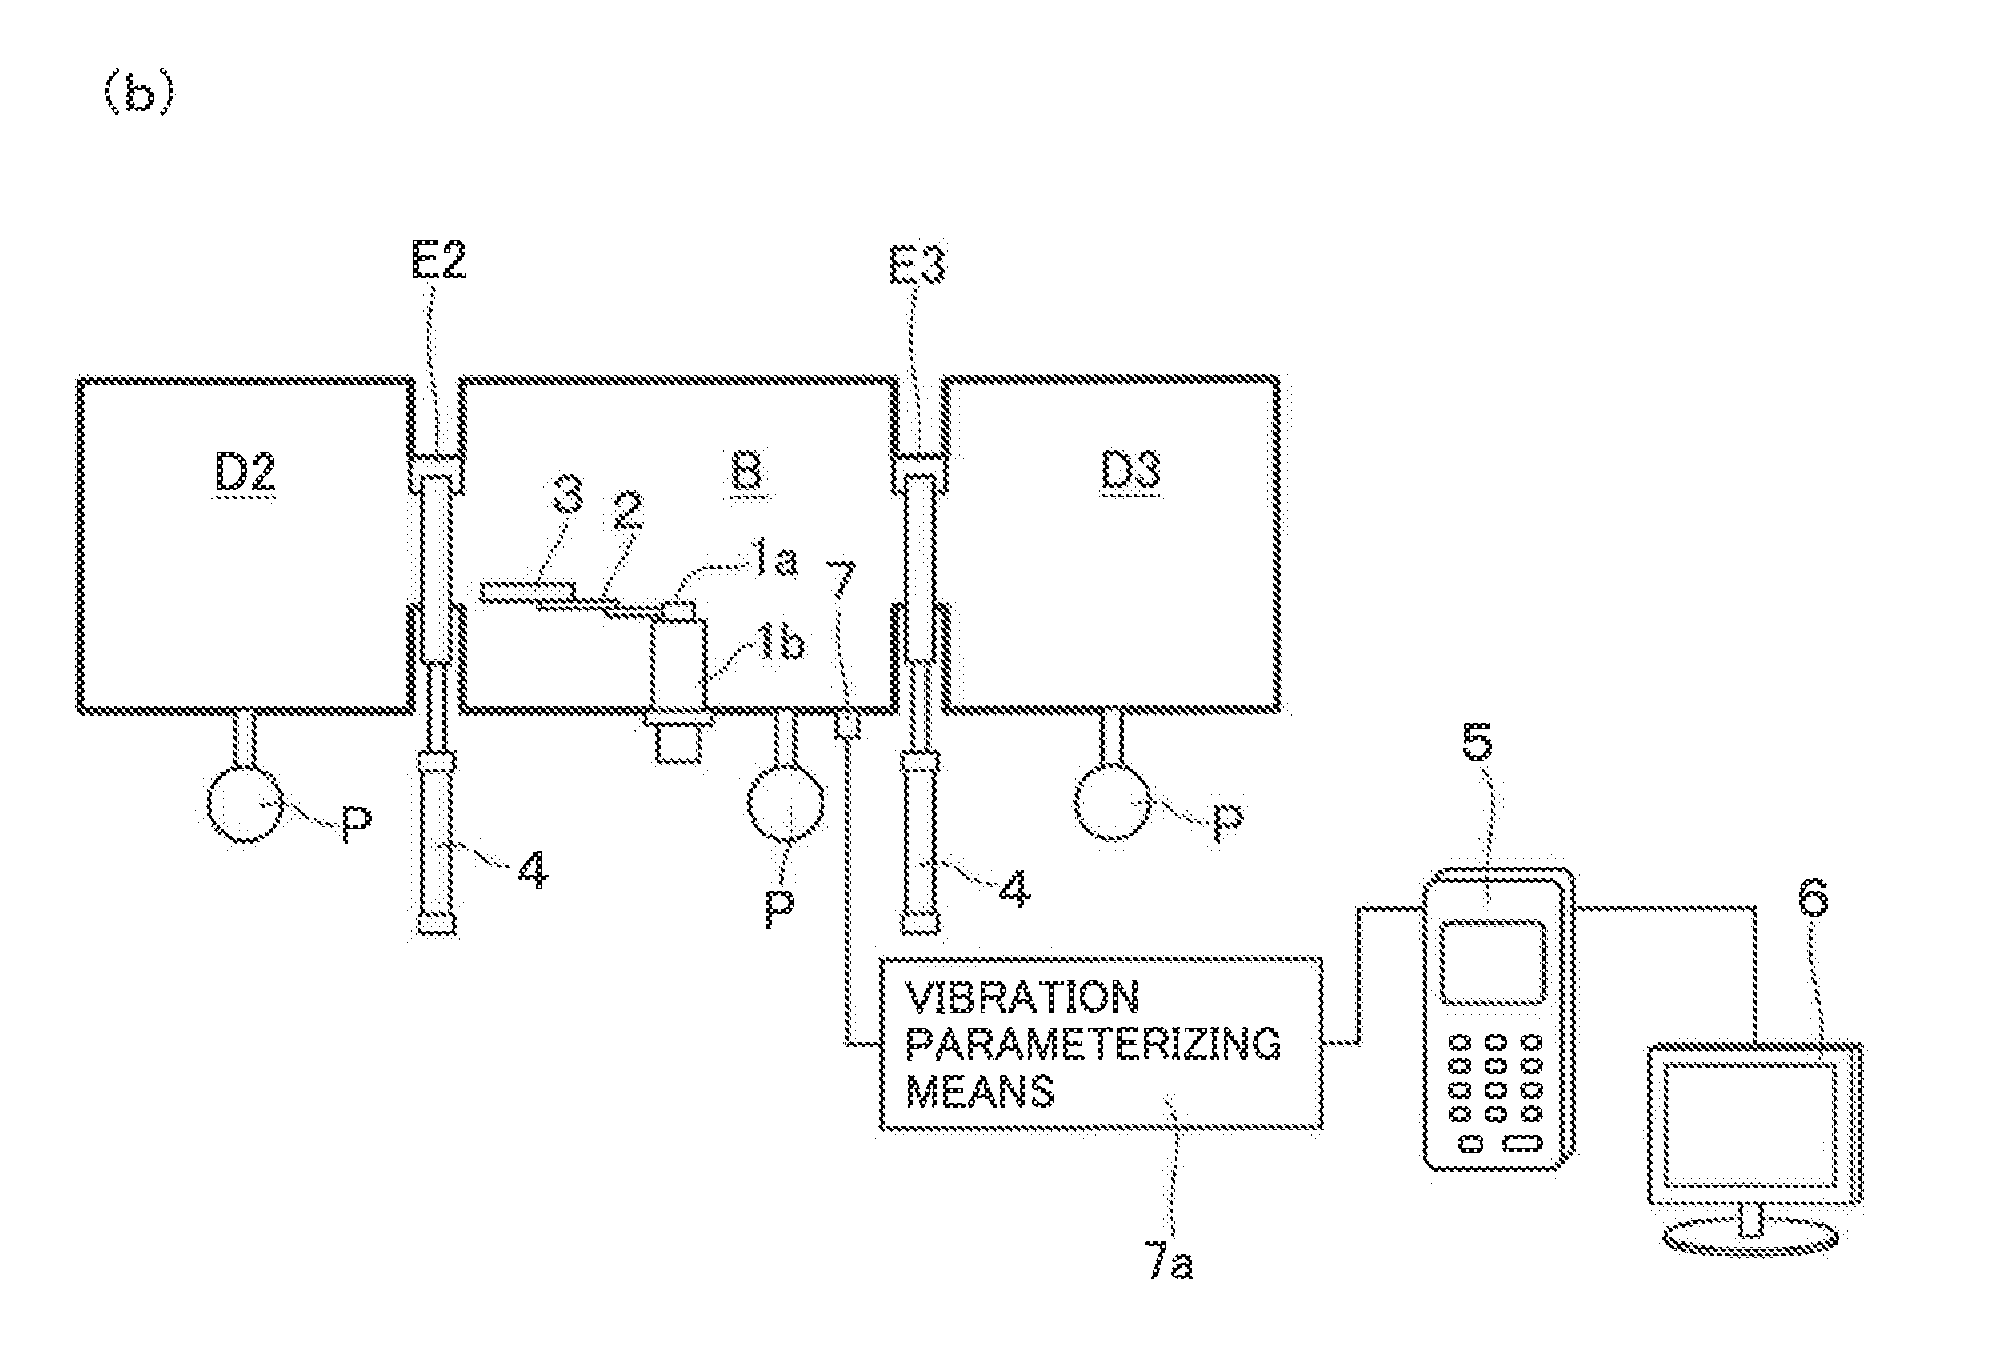 Operation monitoring system for processing apparatus